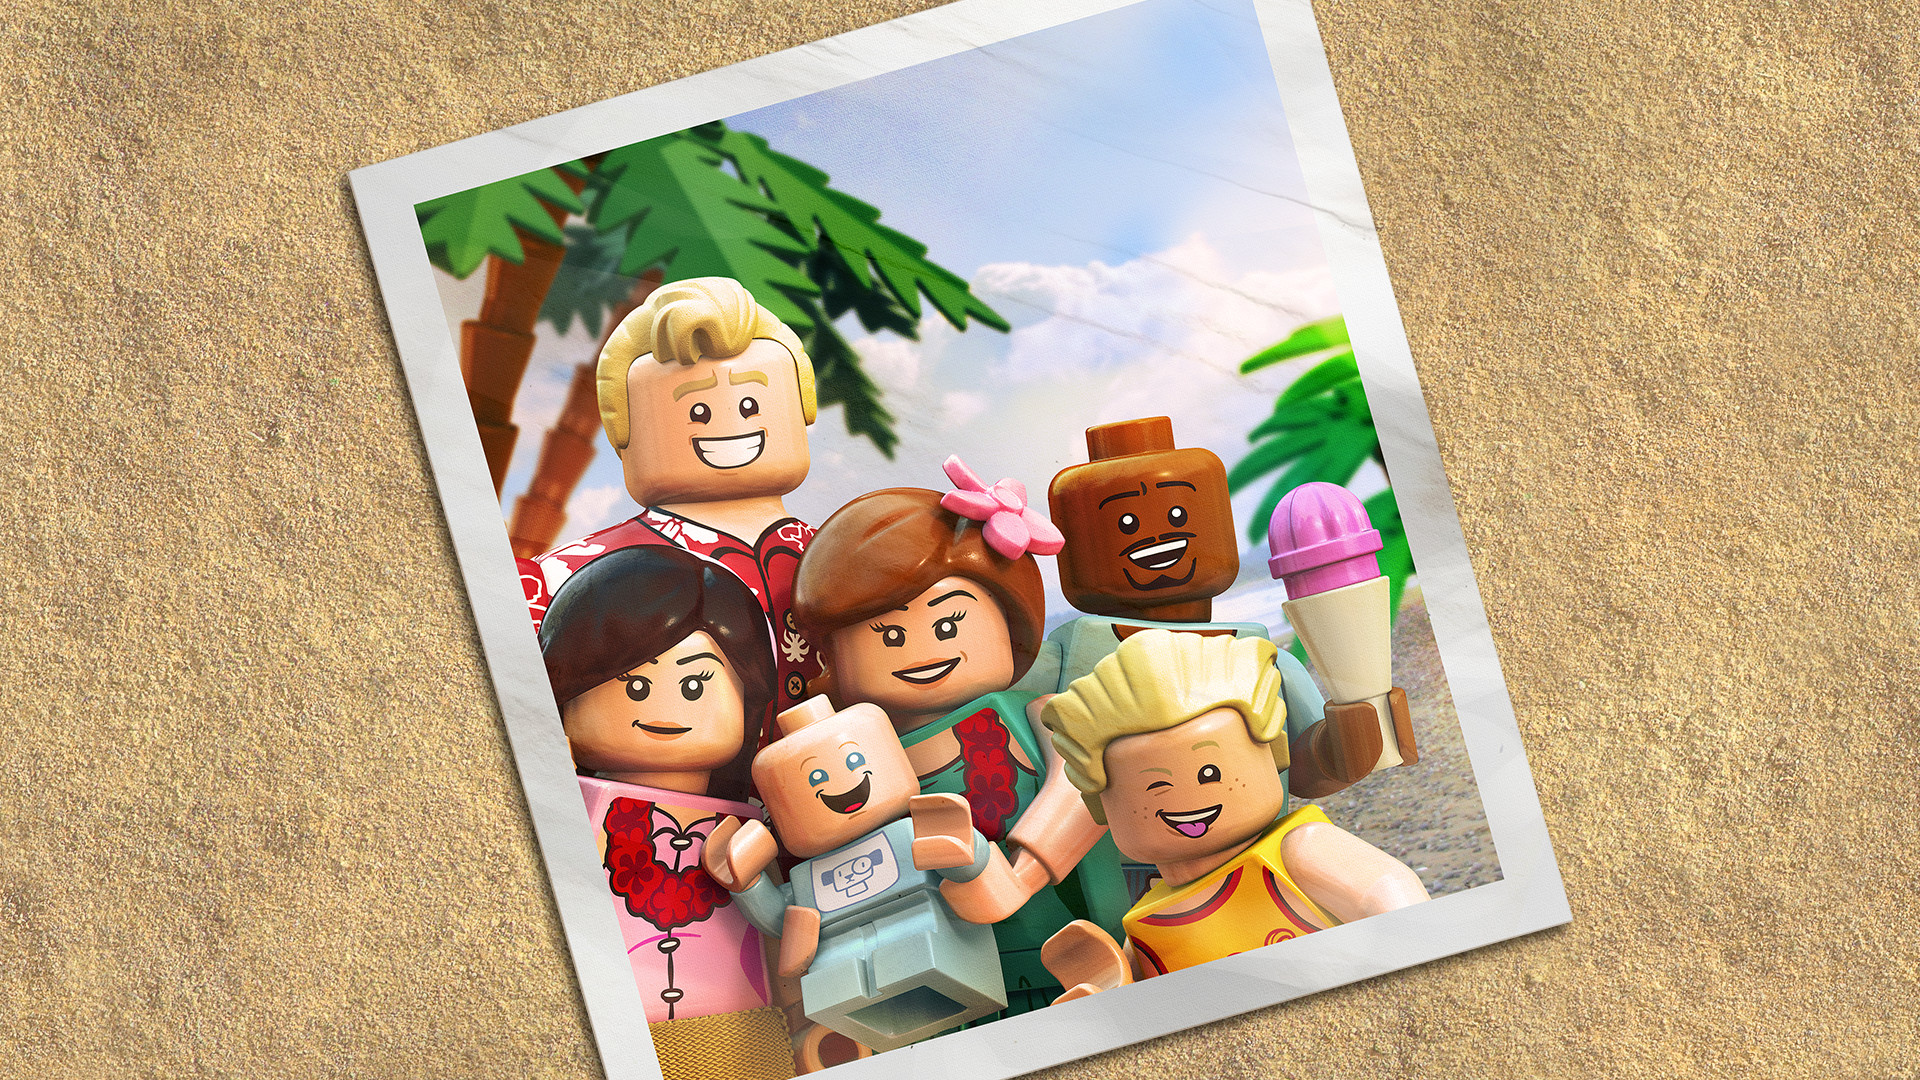 LEGO THE INCREDIBLES - Parr Family Vacation Character Pack DLC EU PS5 CD Key [$ 0.73]